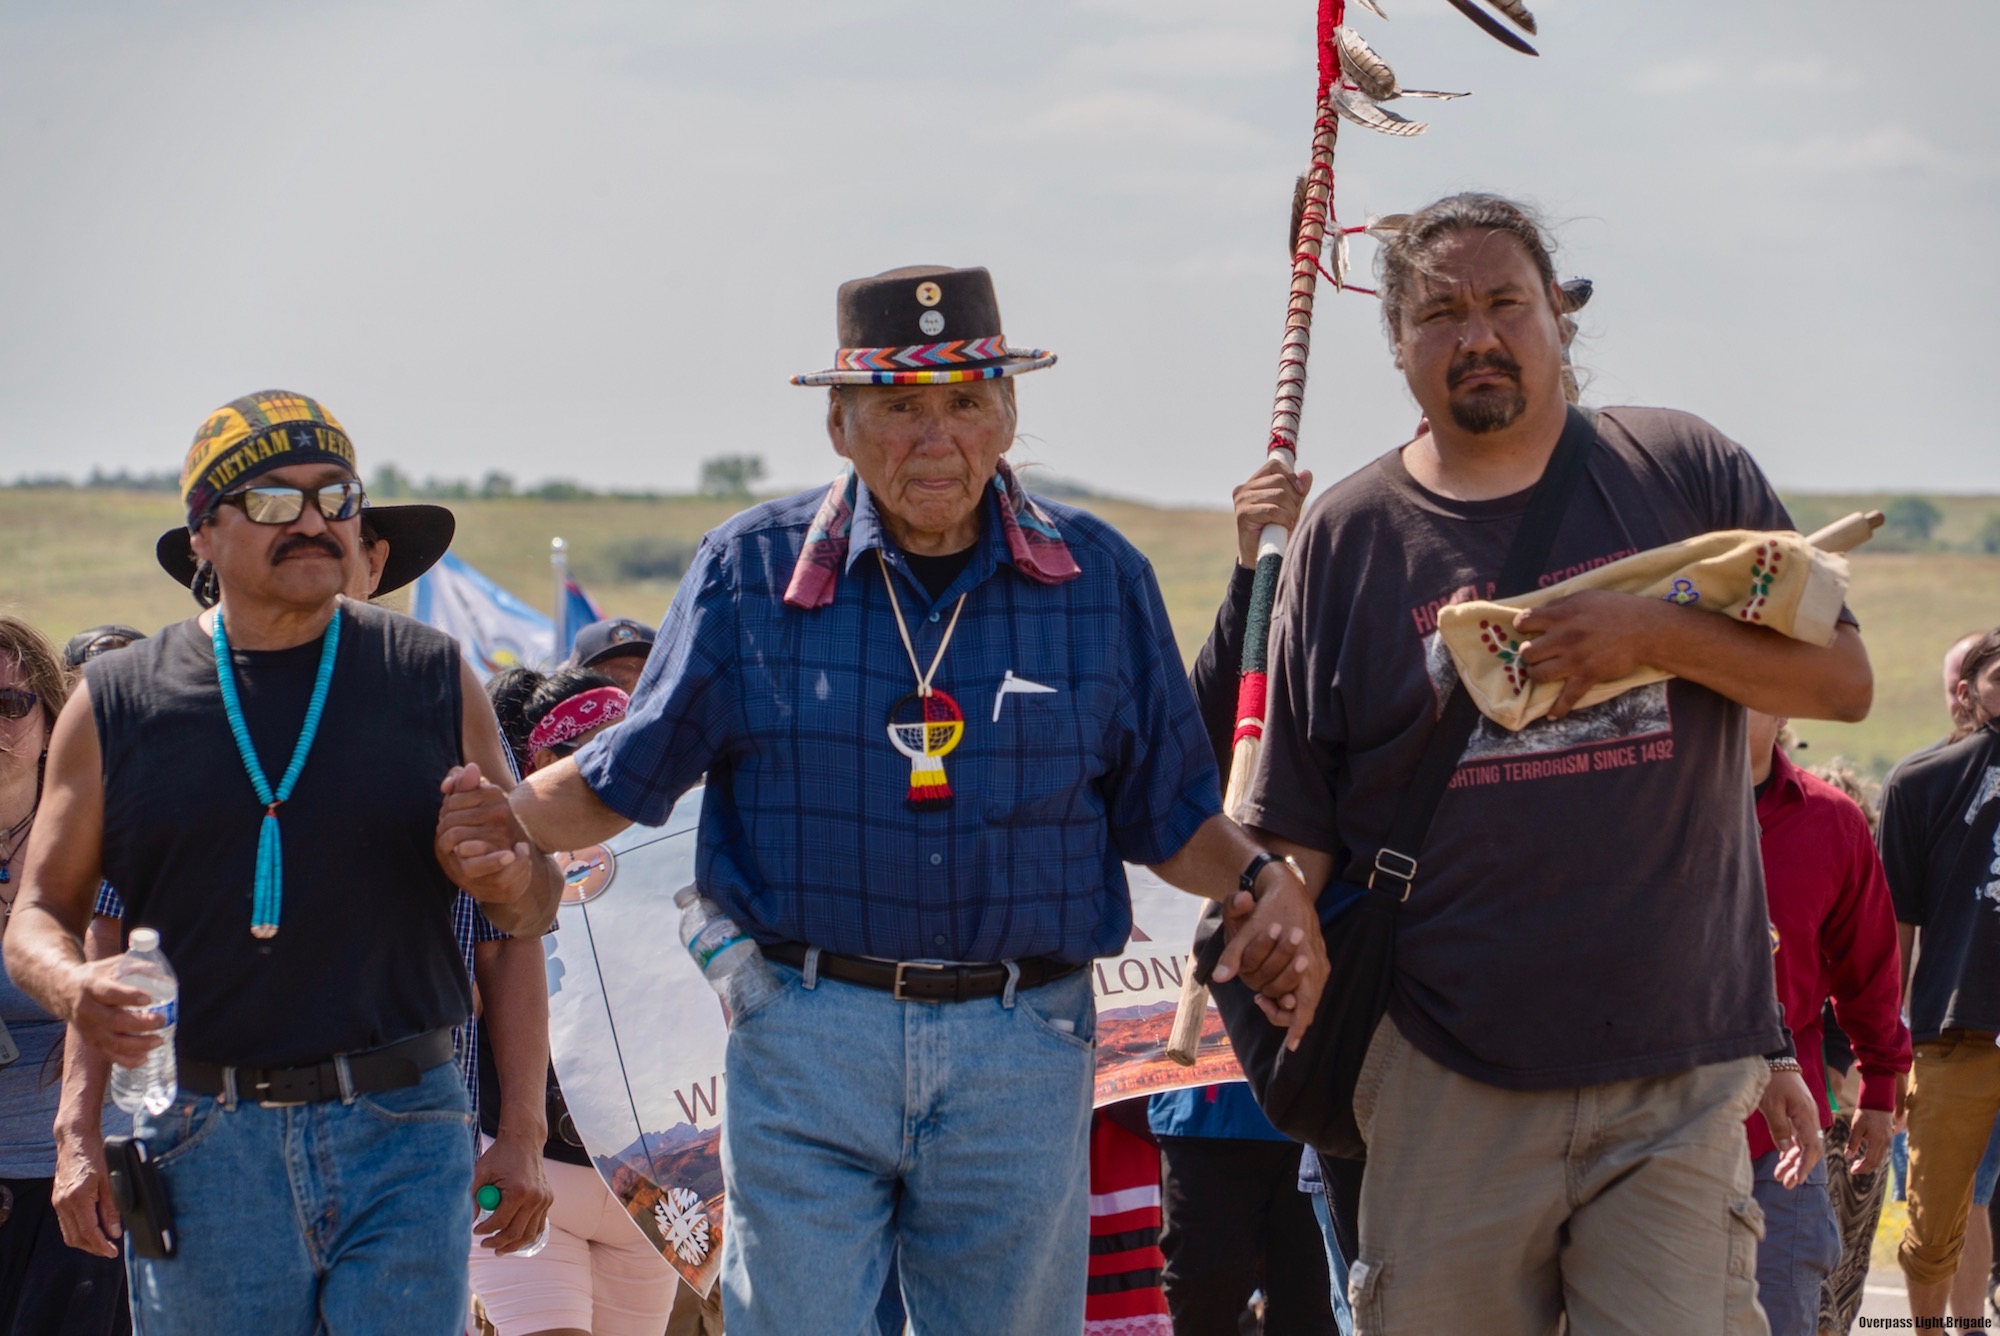 Leonard Peltier: Dennis Banks was one of the greatest Indian warriors of our time